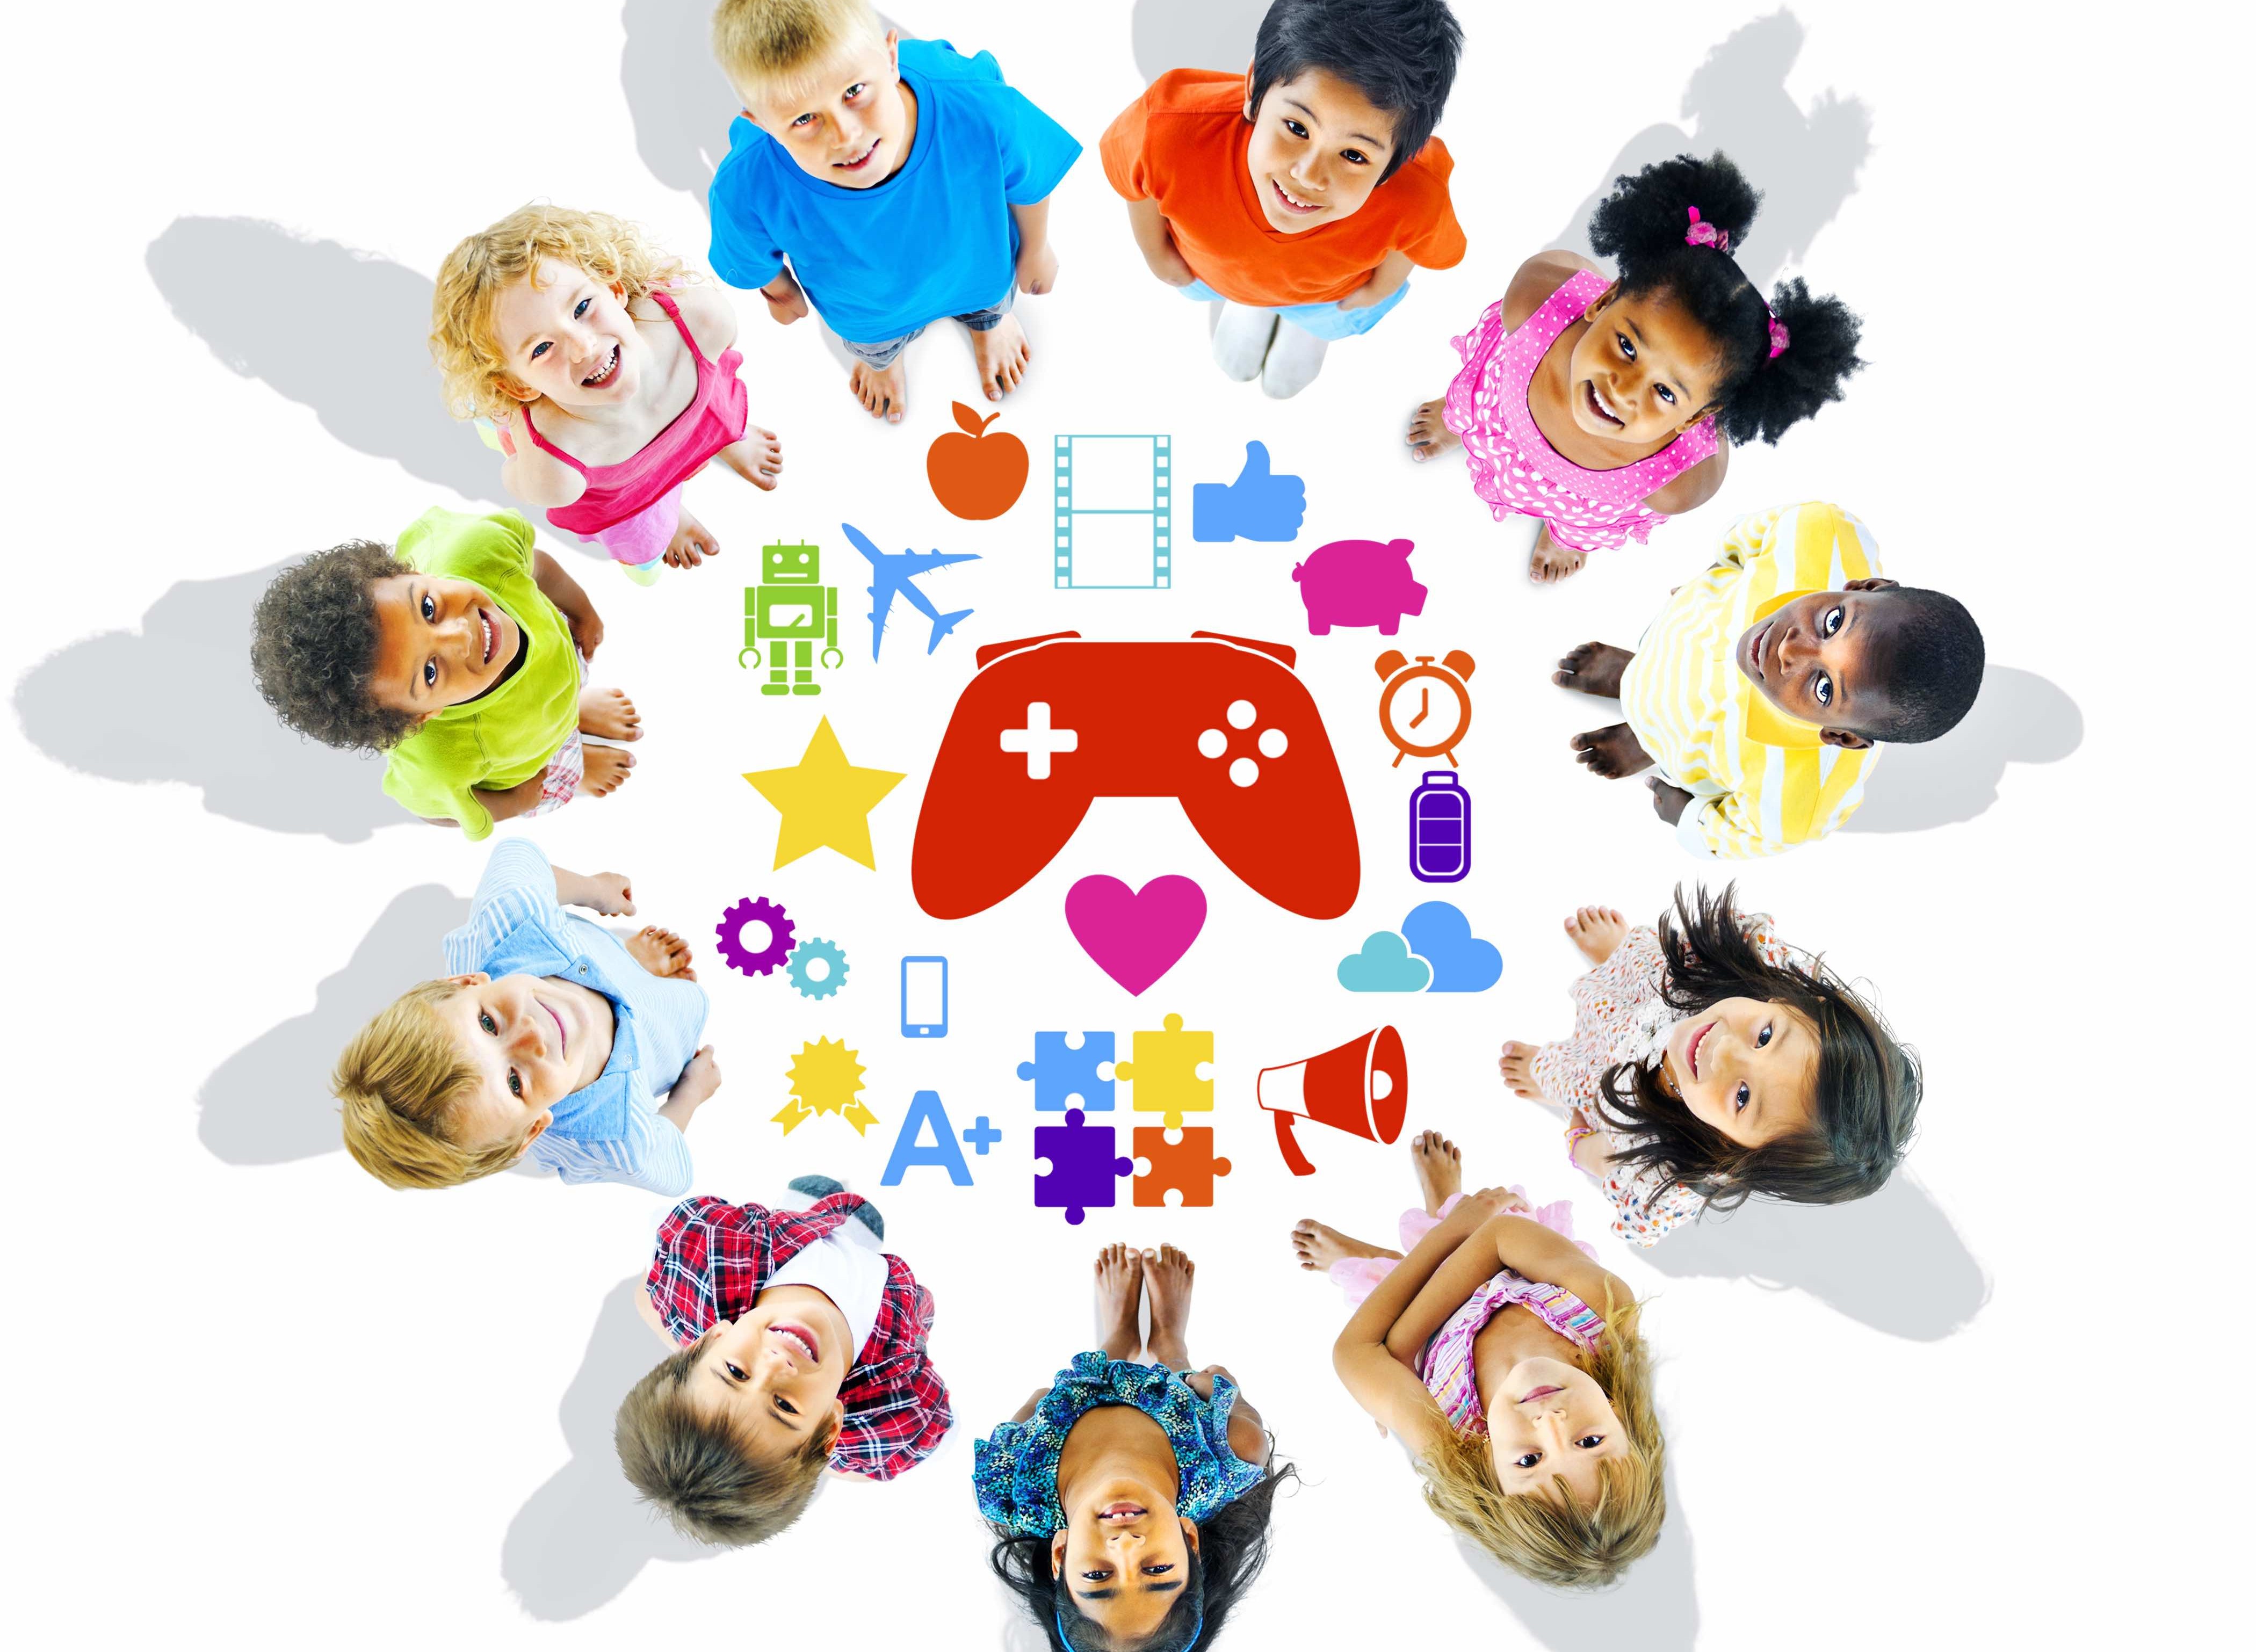 Group of Children Looking Up with Gaming Symbols